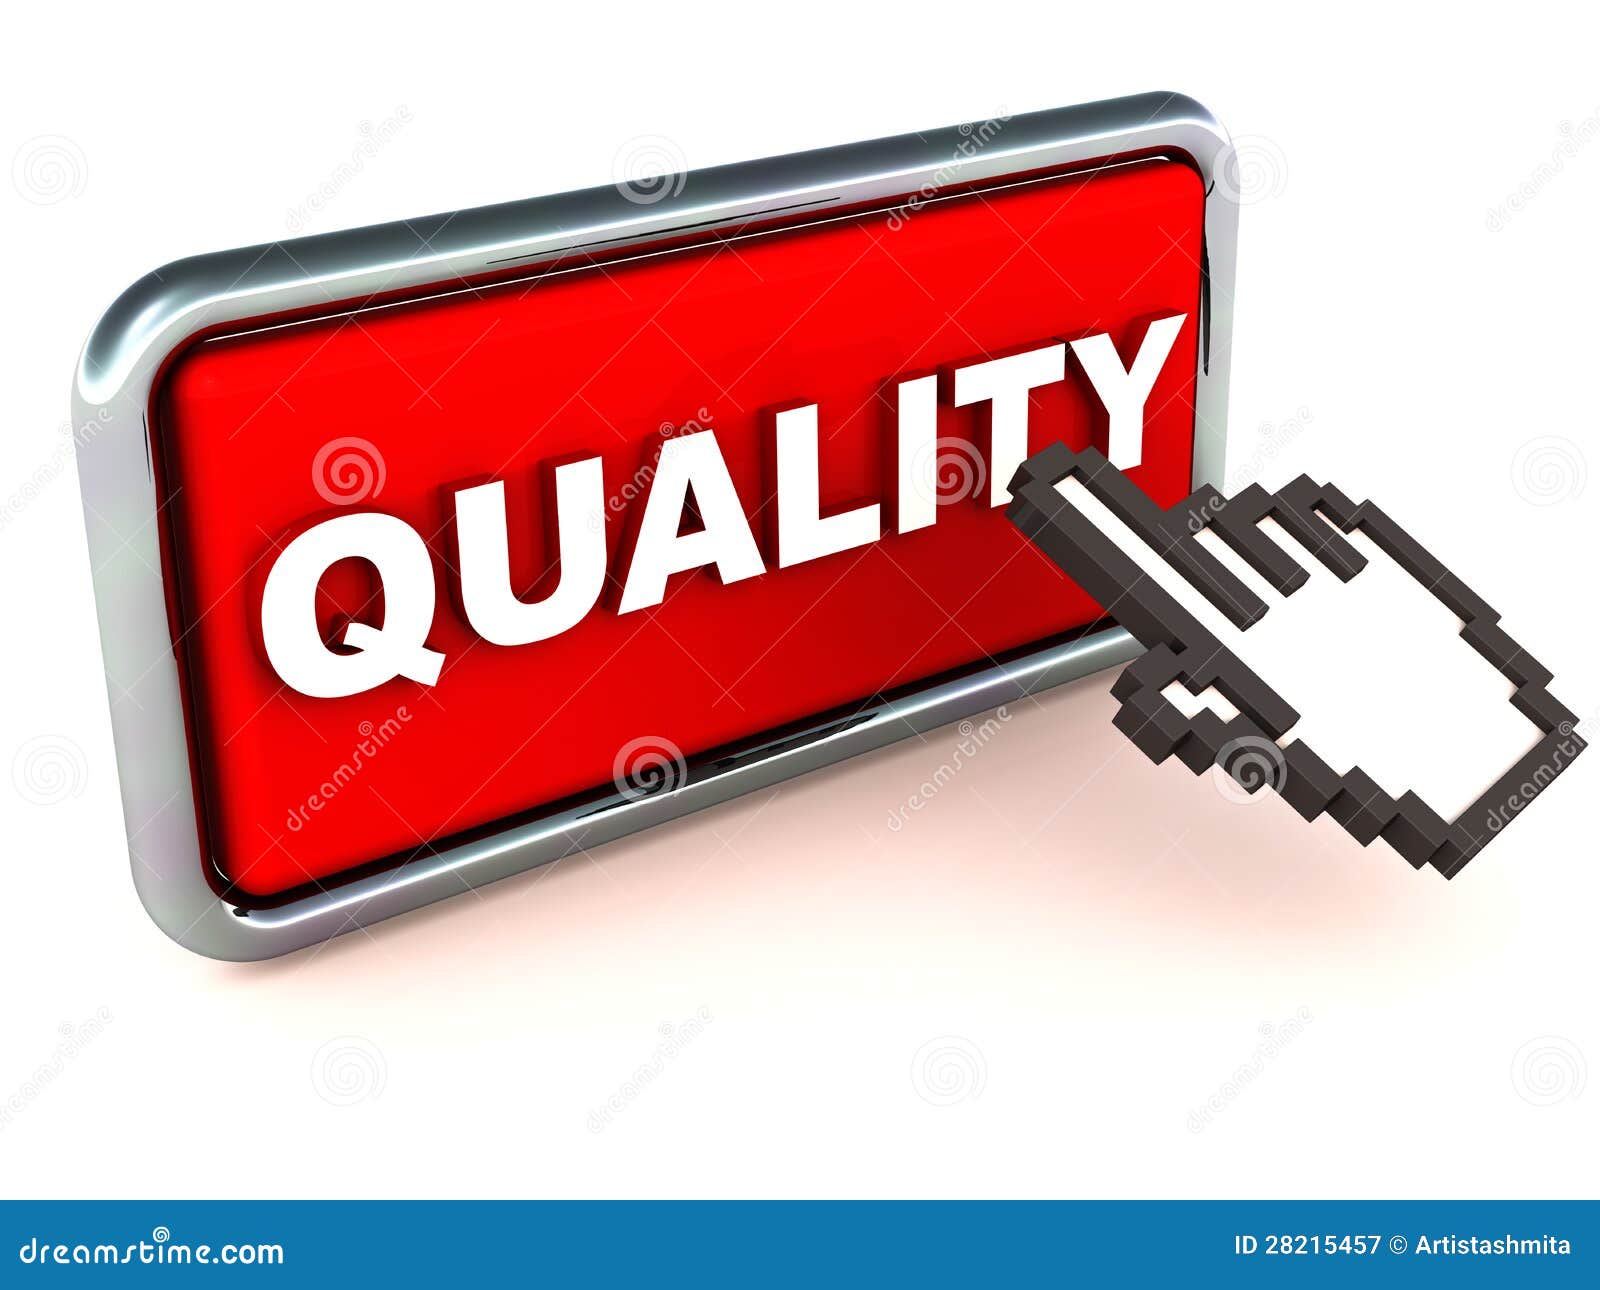 free clipart for quality control - photo #15